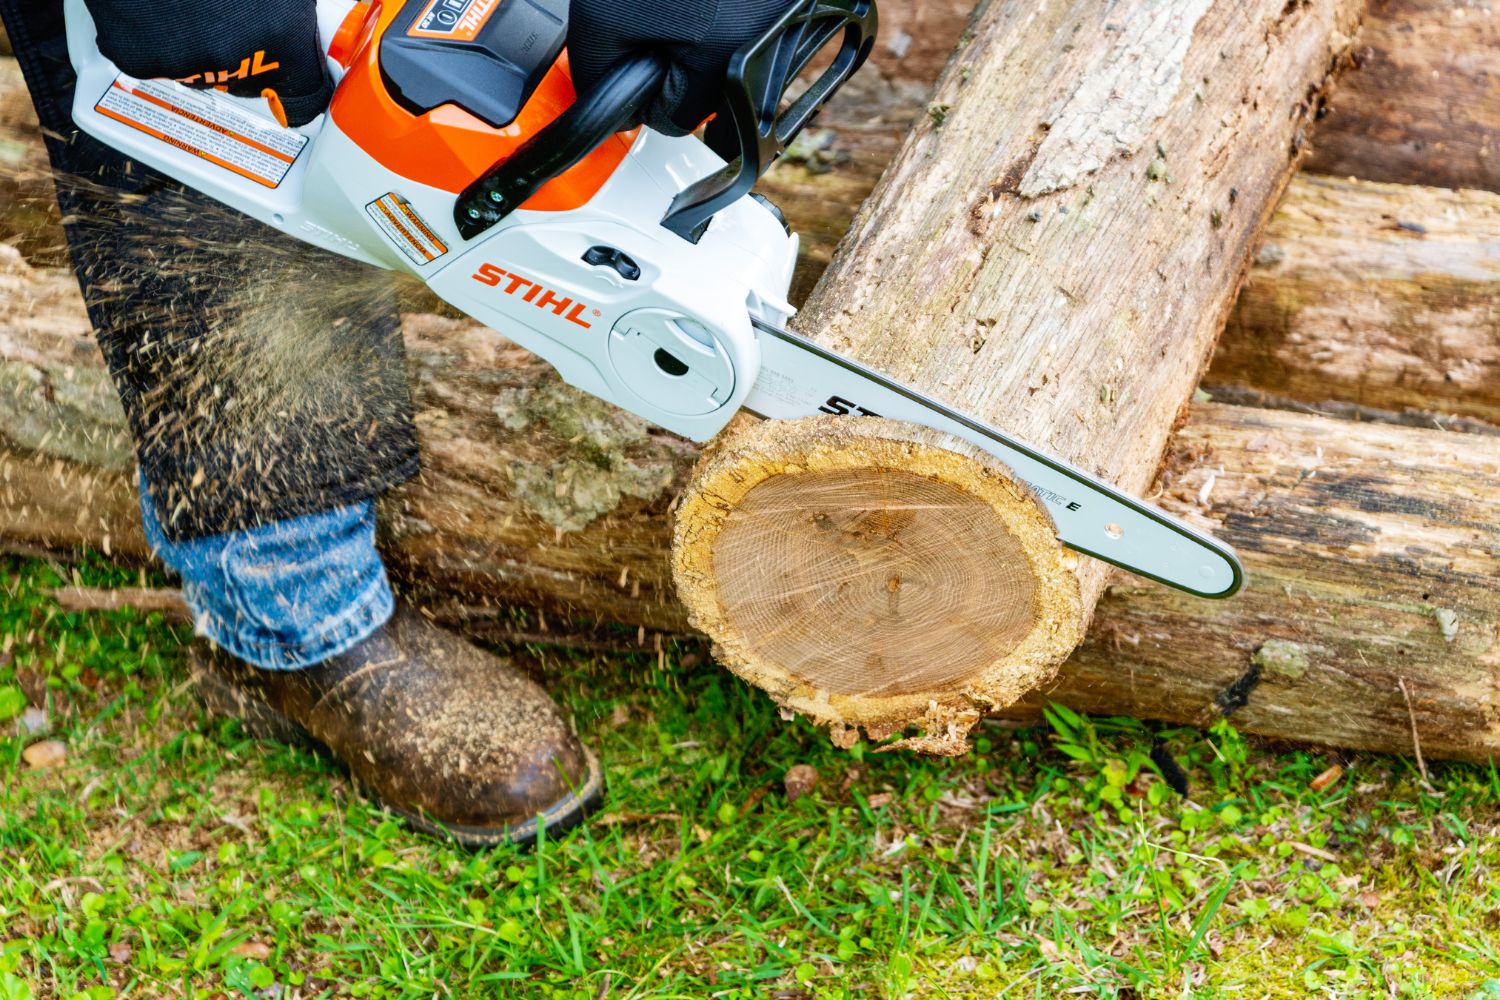 The Best Battery Chainsaws Option